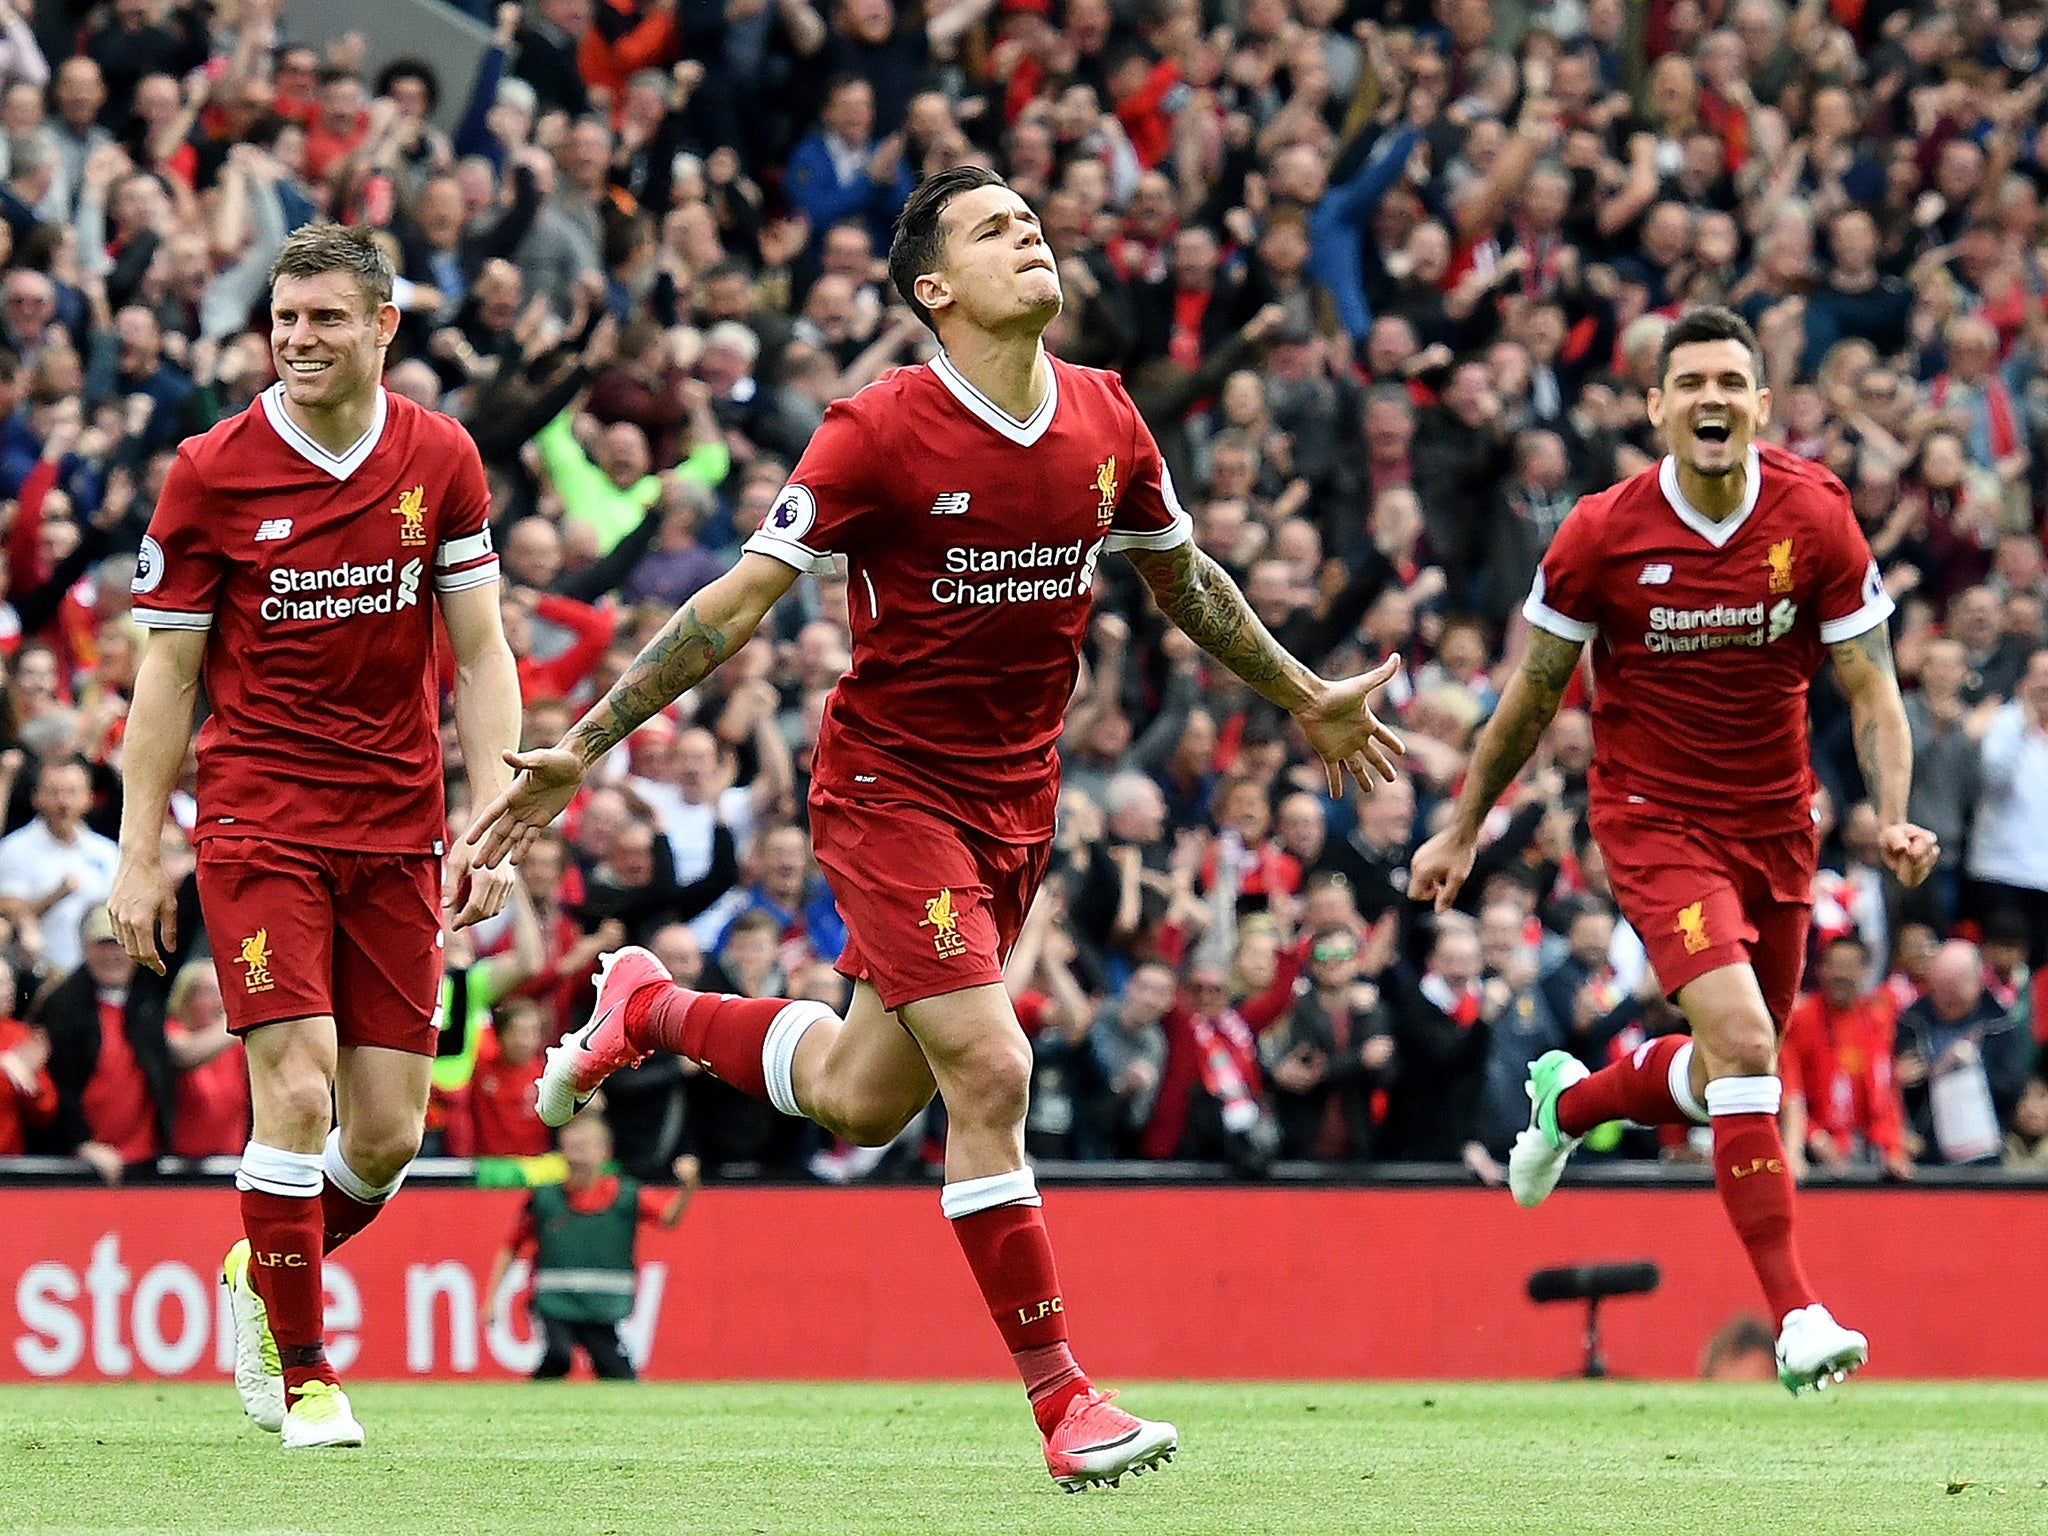 Philippe Coutinho scored the second goal in Liverpool's vital win over Middlesbrough on Sunday